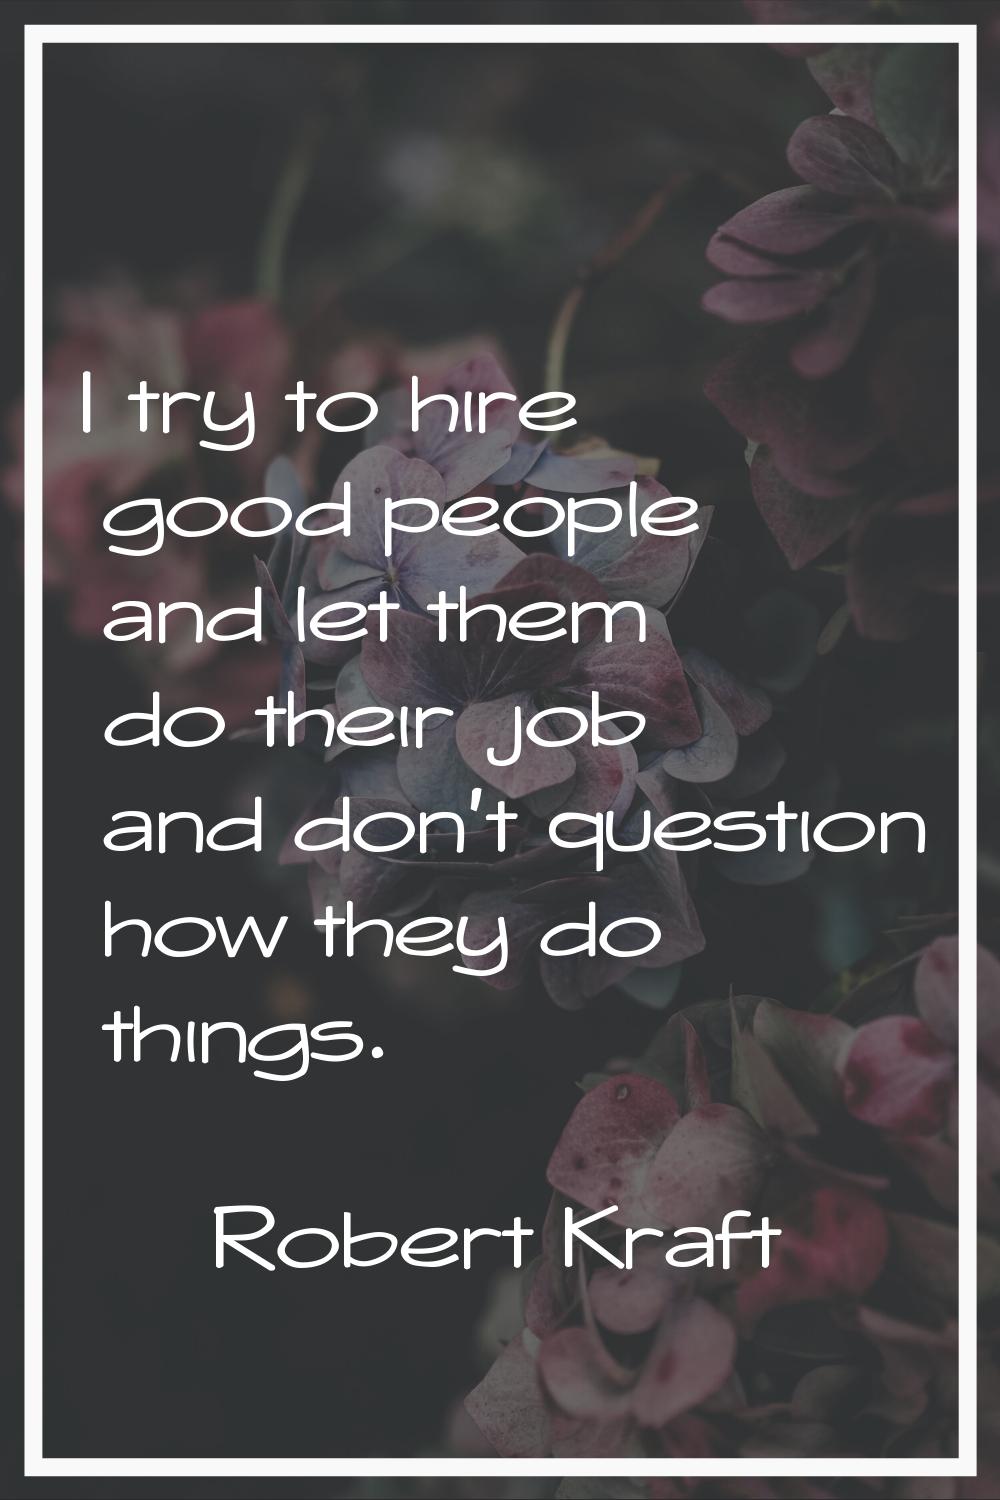 I try to hire good people and let them do their job and don't question how they do things.